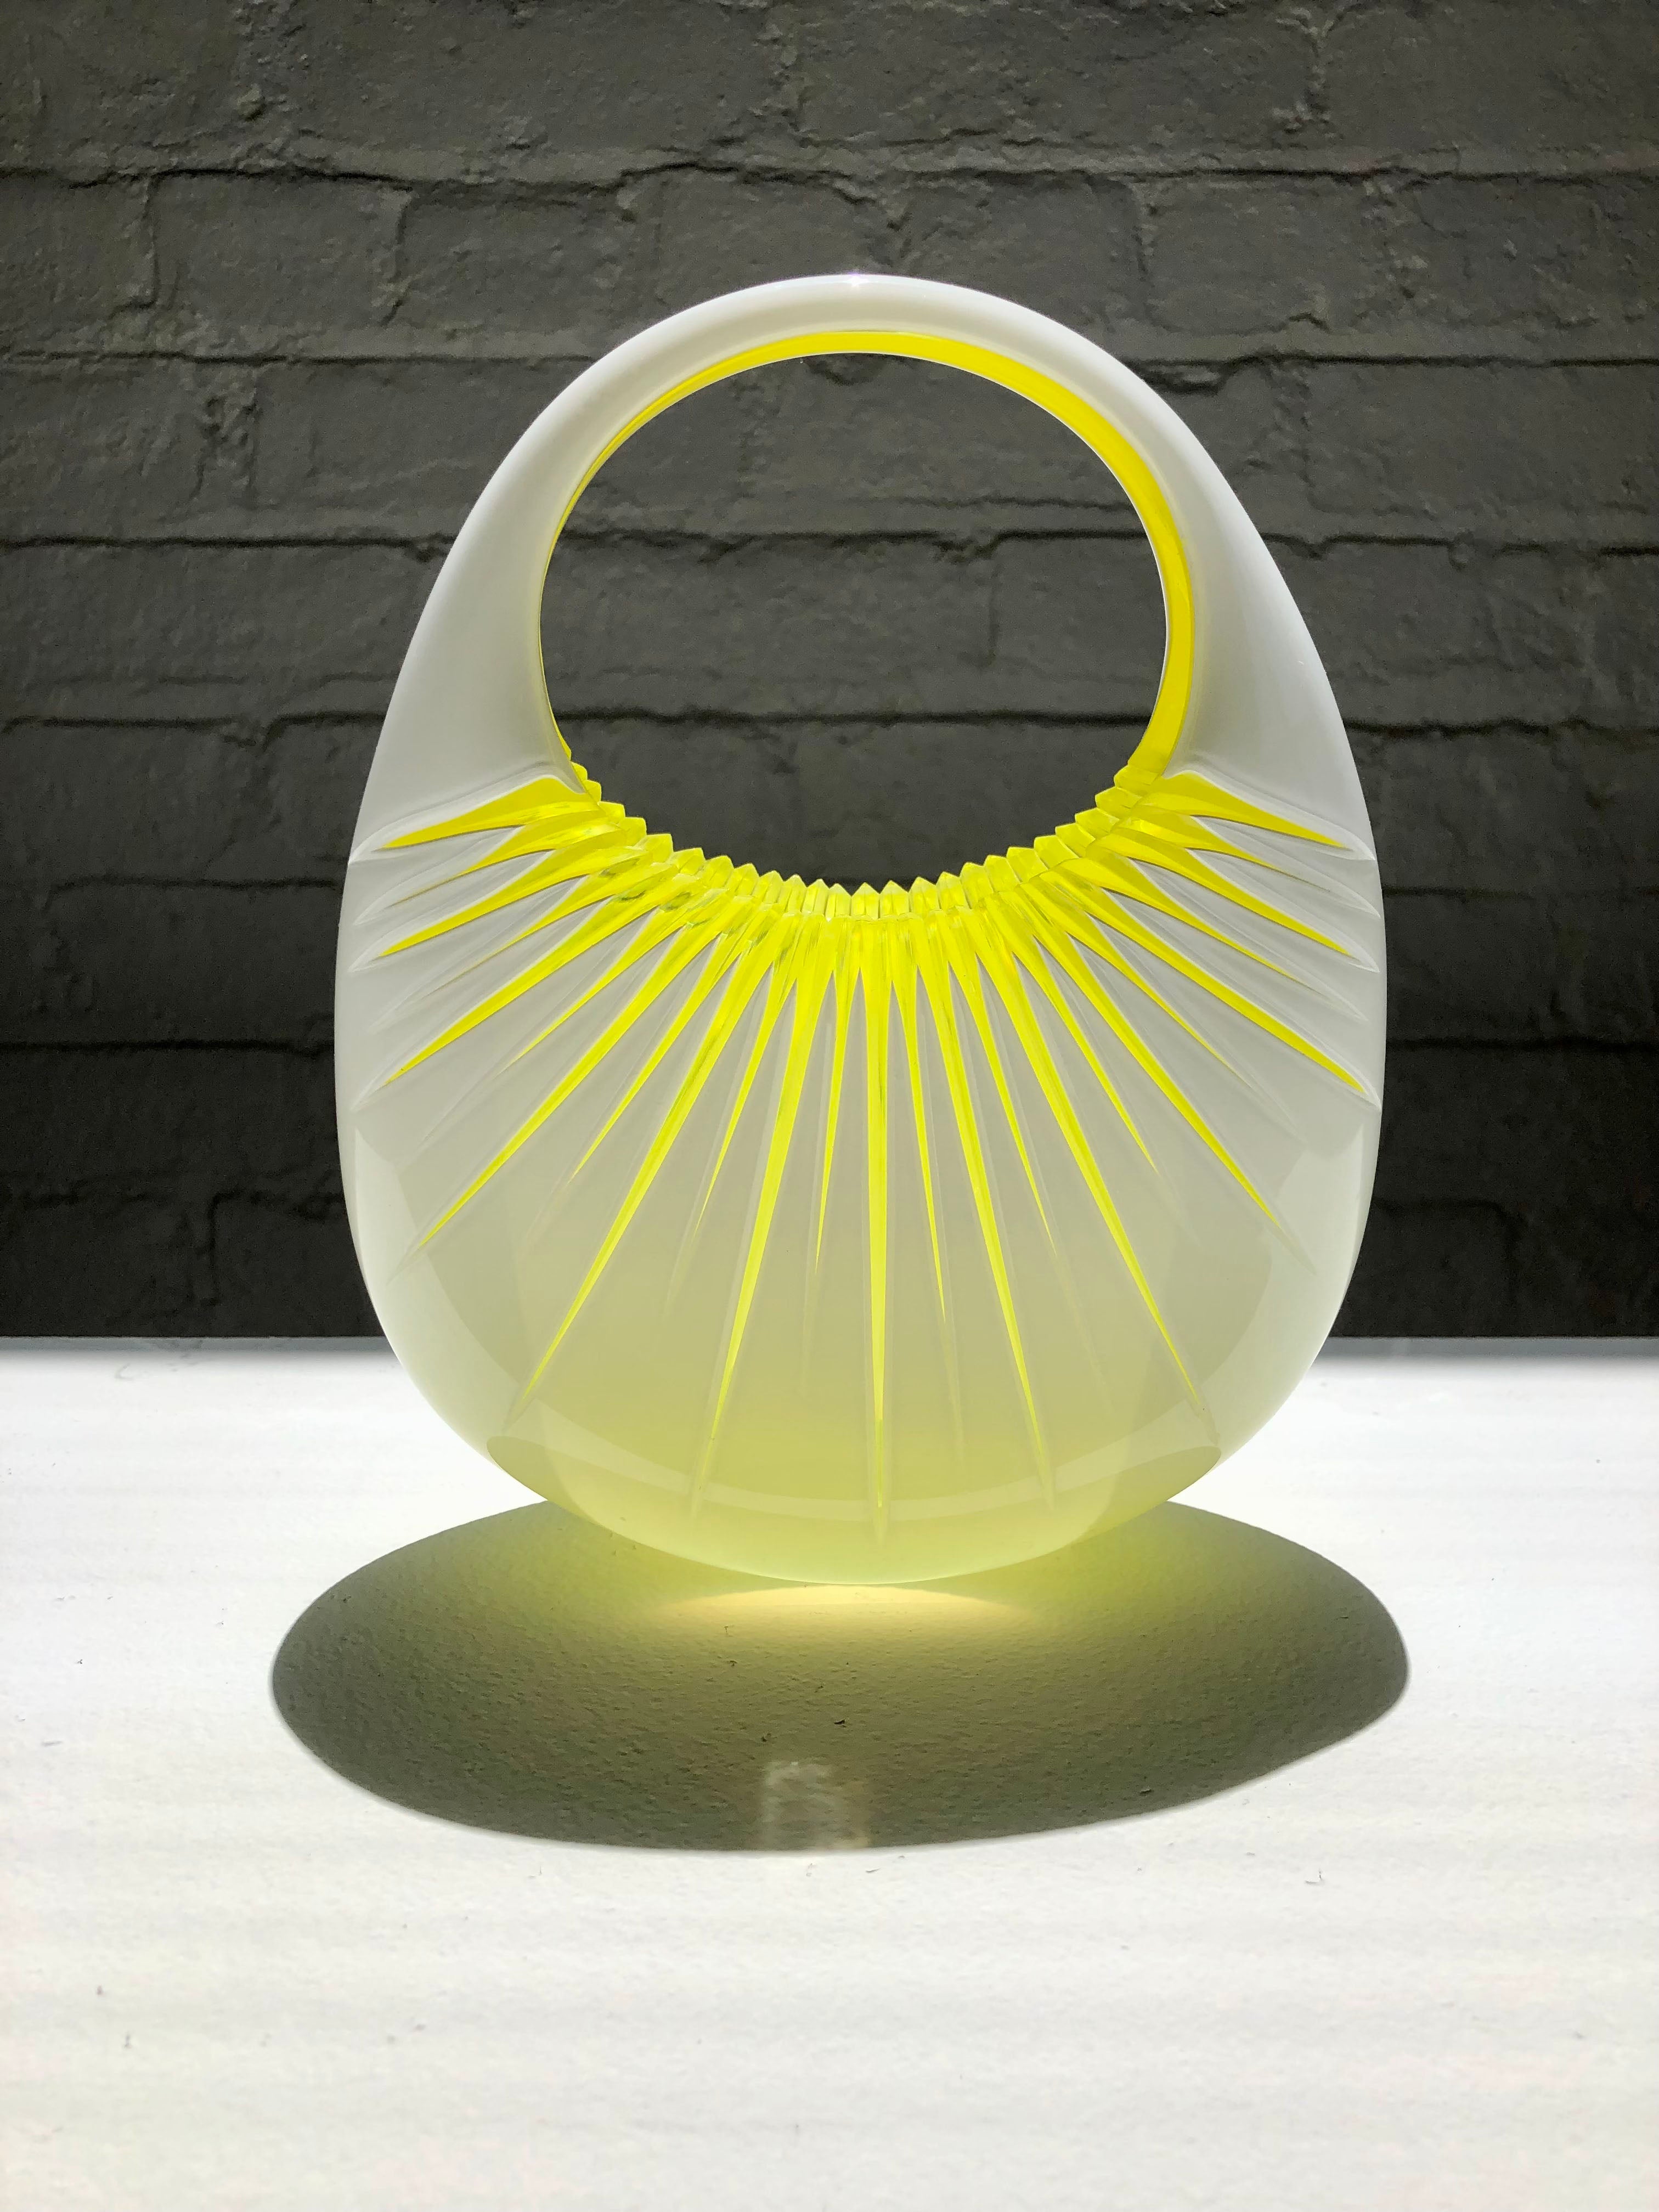 American Glass Handbag with Yellow and White Engraved Sunburst by Raiffe